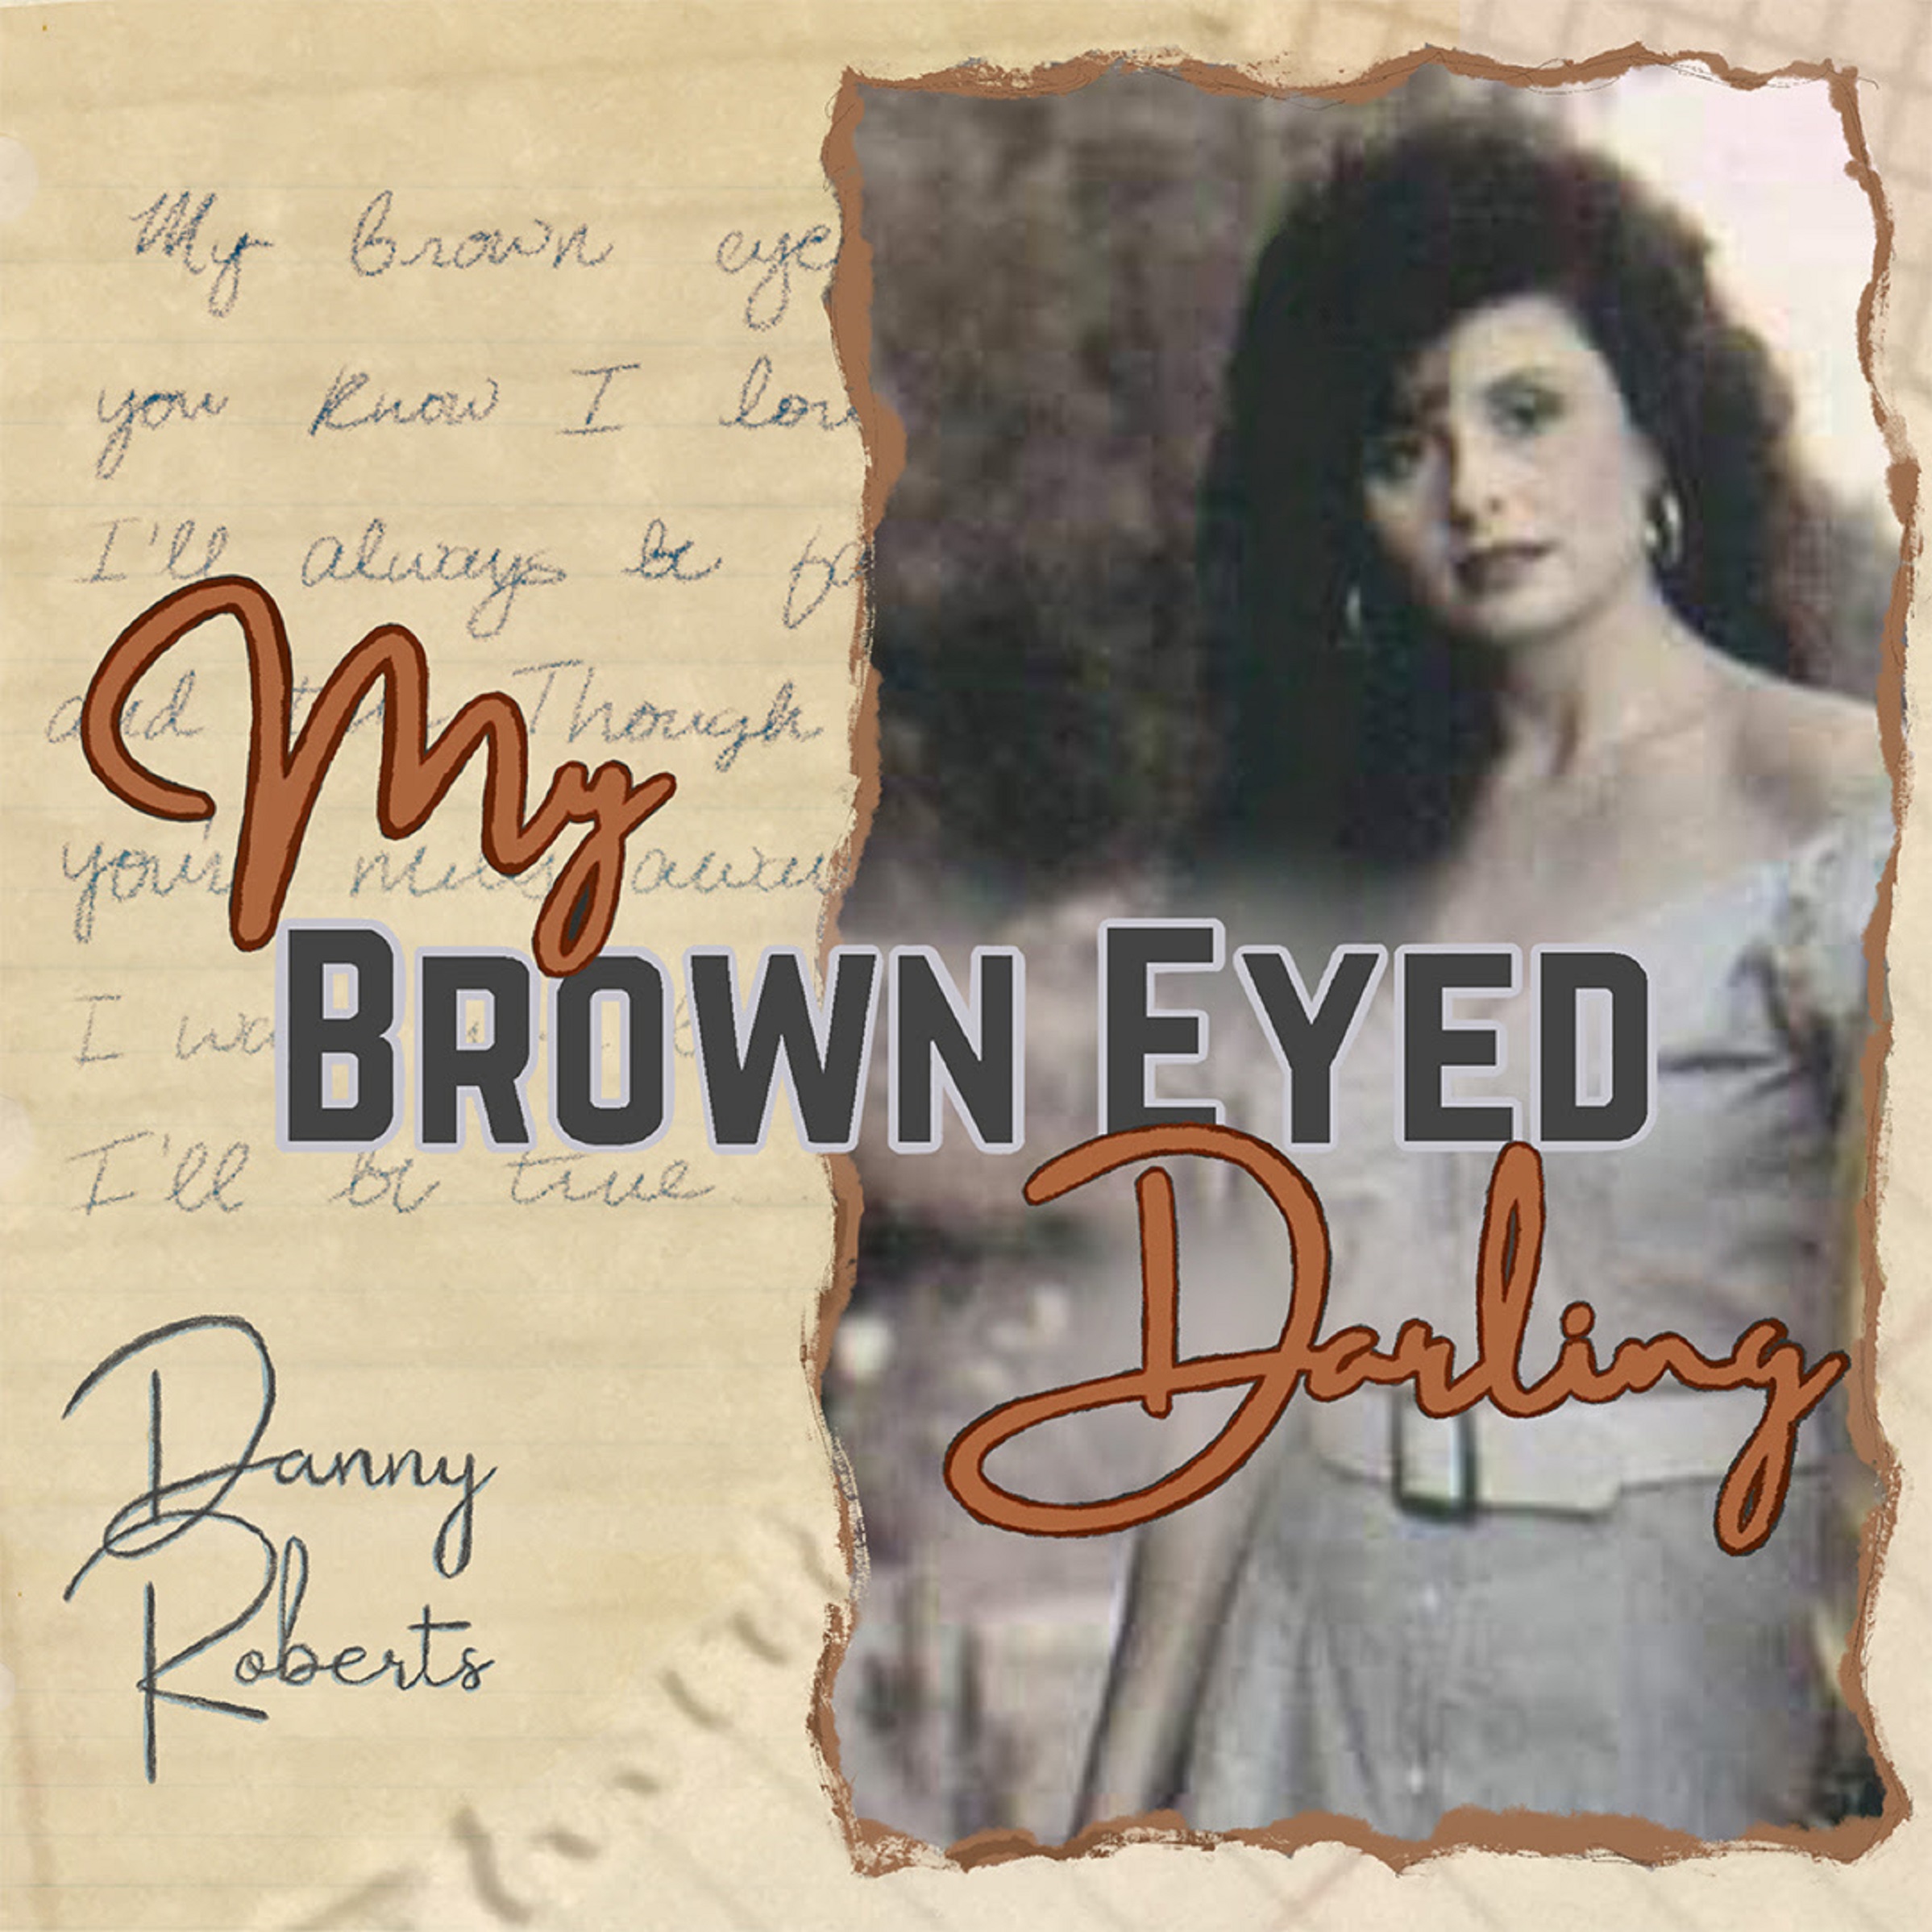 Danny Roberts’ “My Brown Eyed Darling” resonates across the years